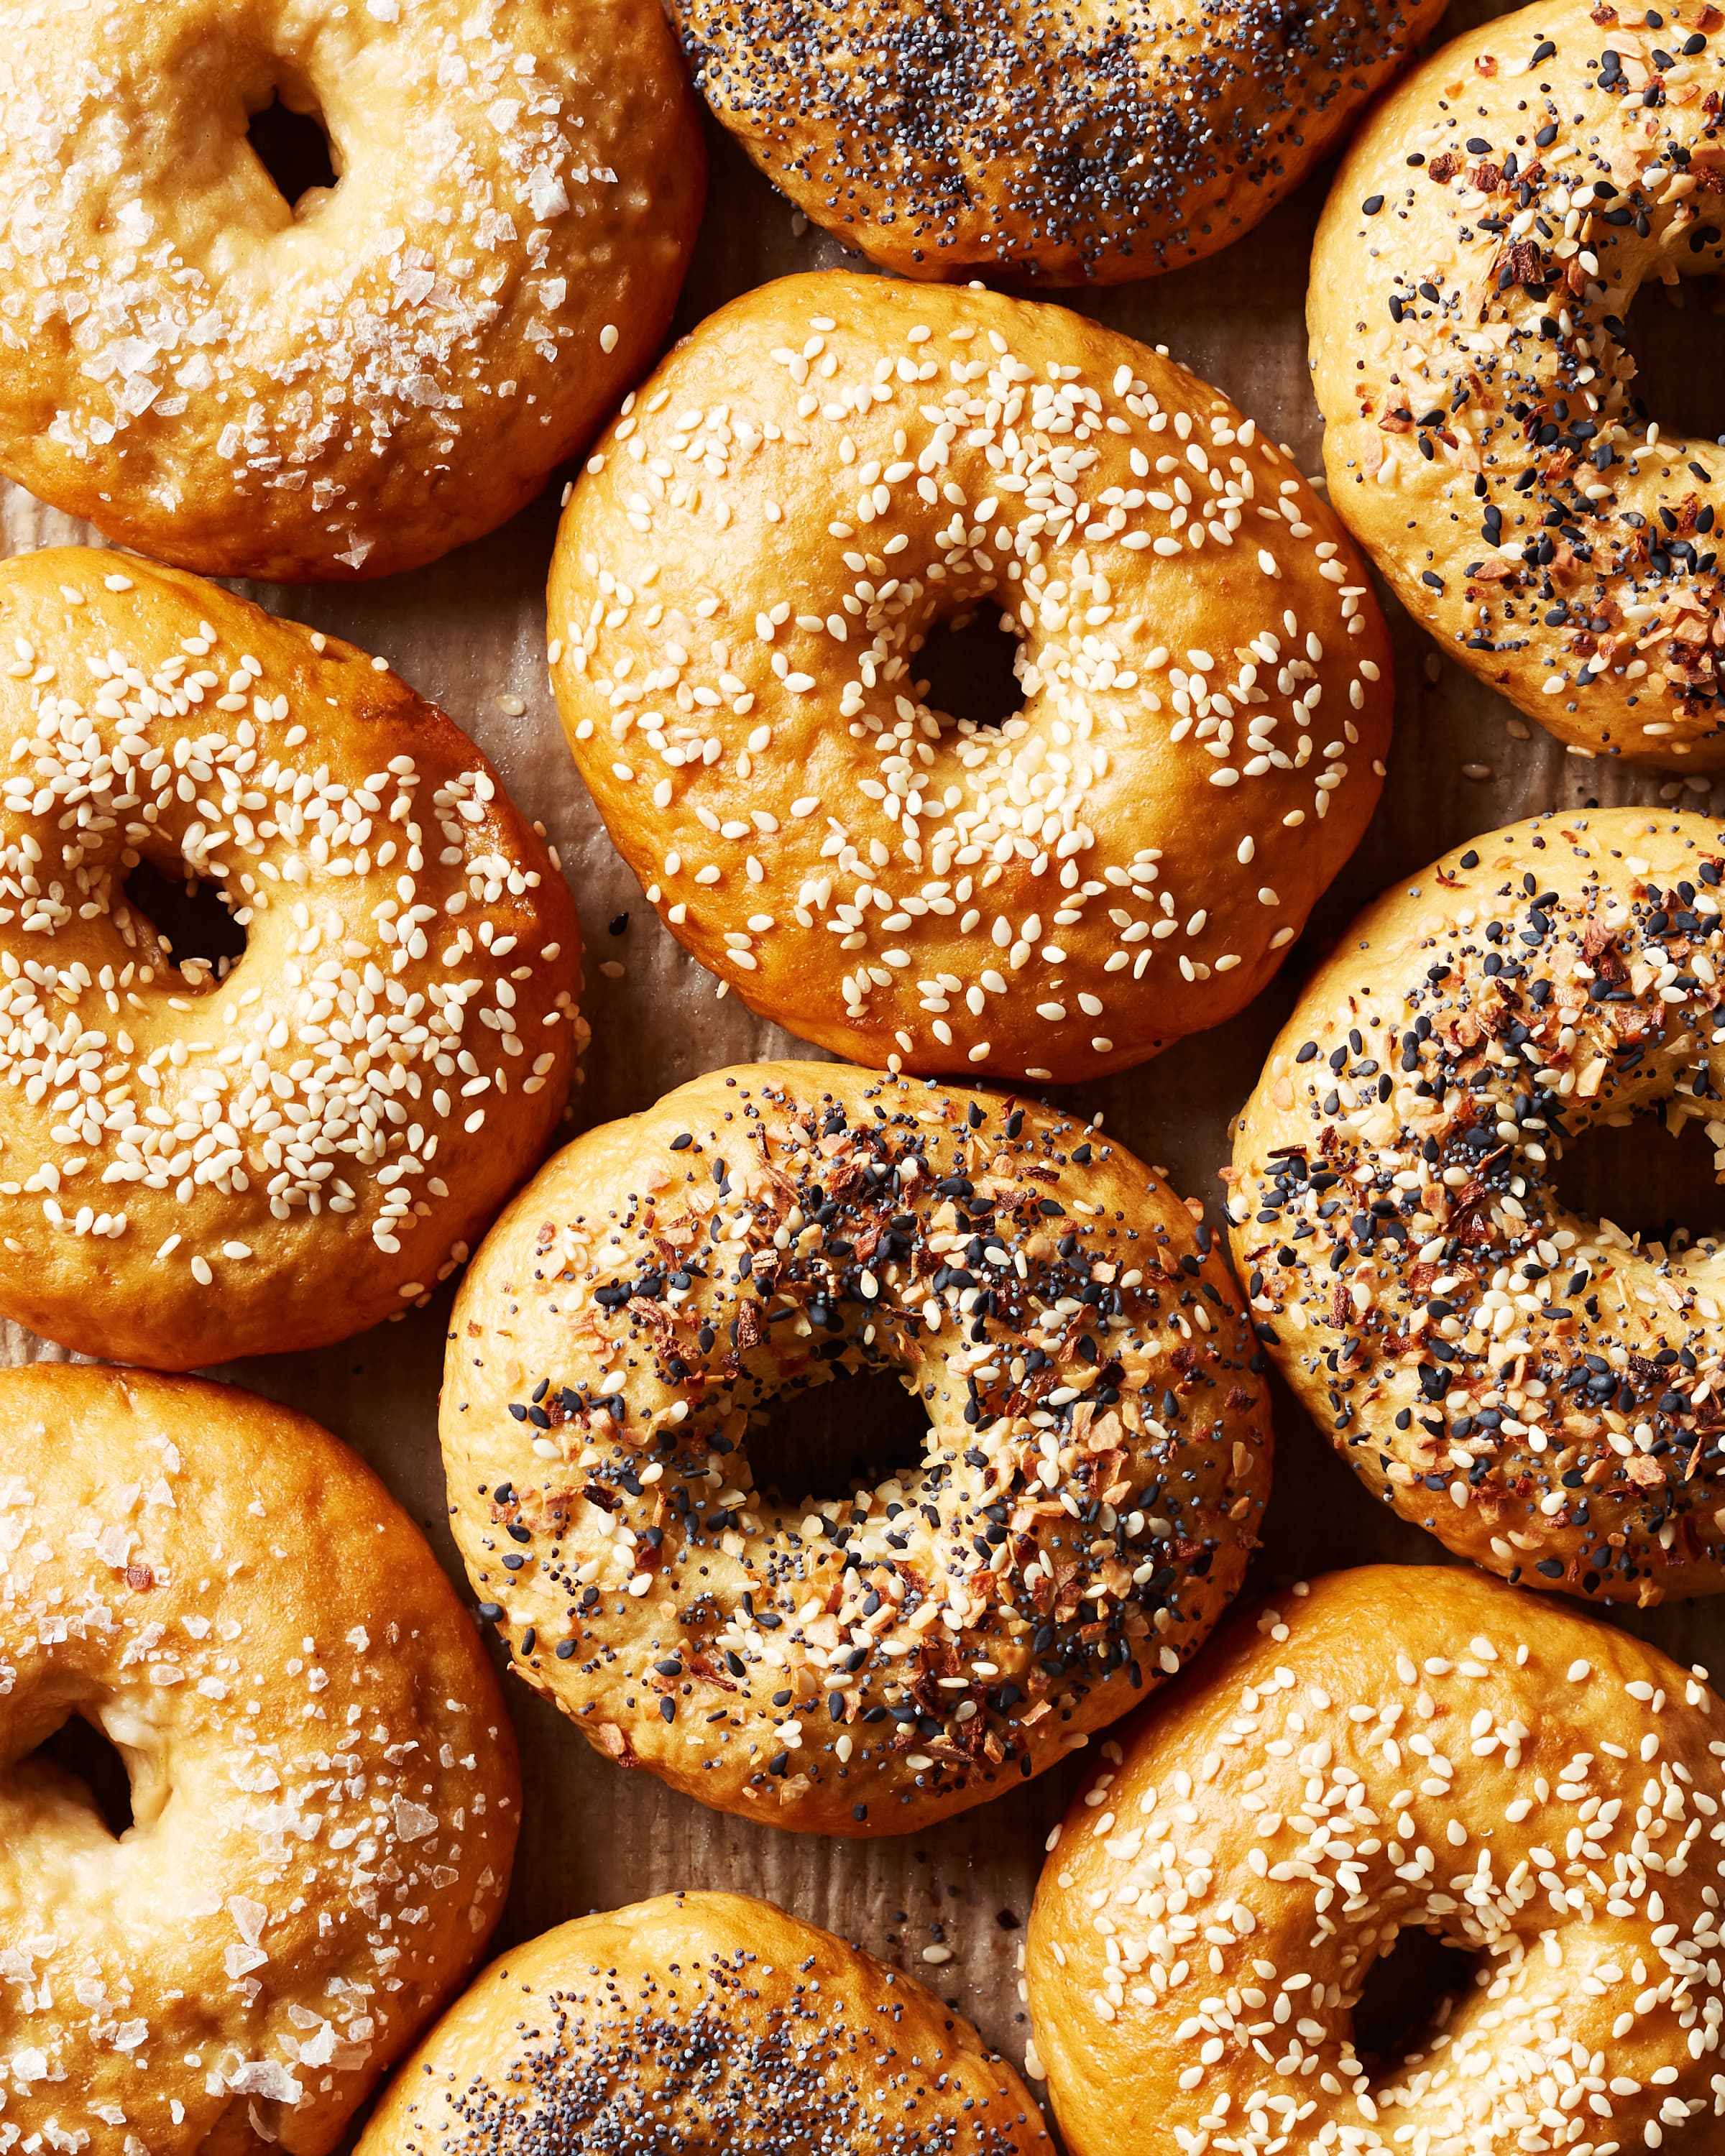 https://cdn.apartmenttherapy.info/image/upload/v1596828731/k/Photo/Recipes/2020-08-how-to-make-bagels/2020_howto_bagels_shot14_197.jpg